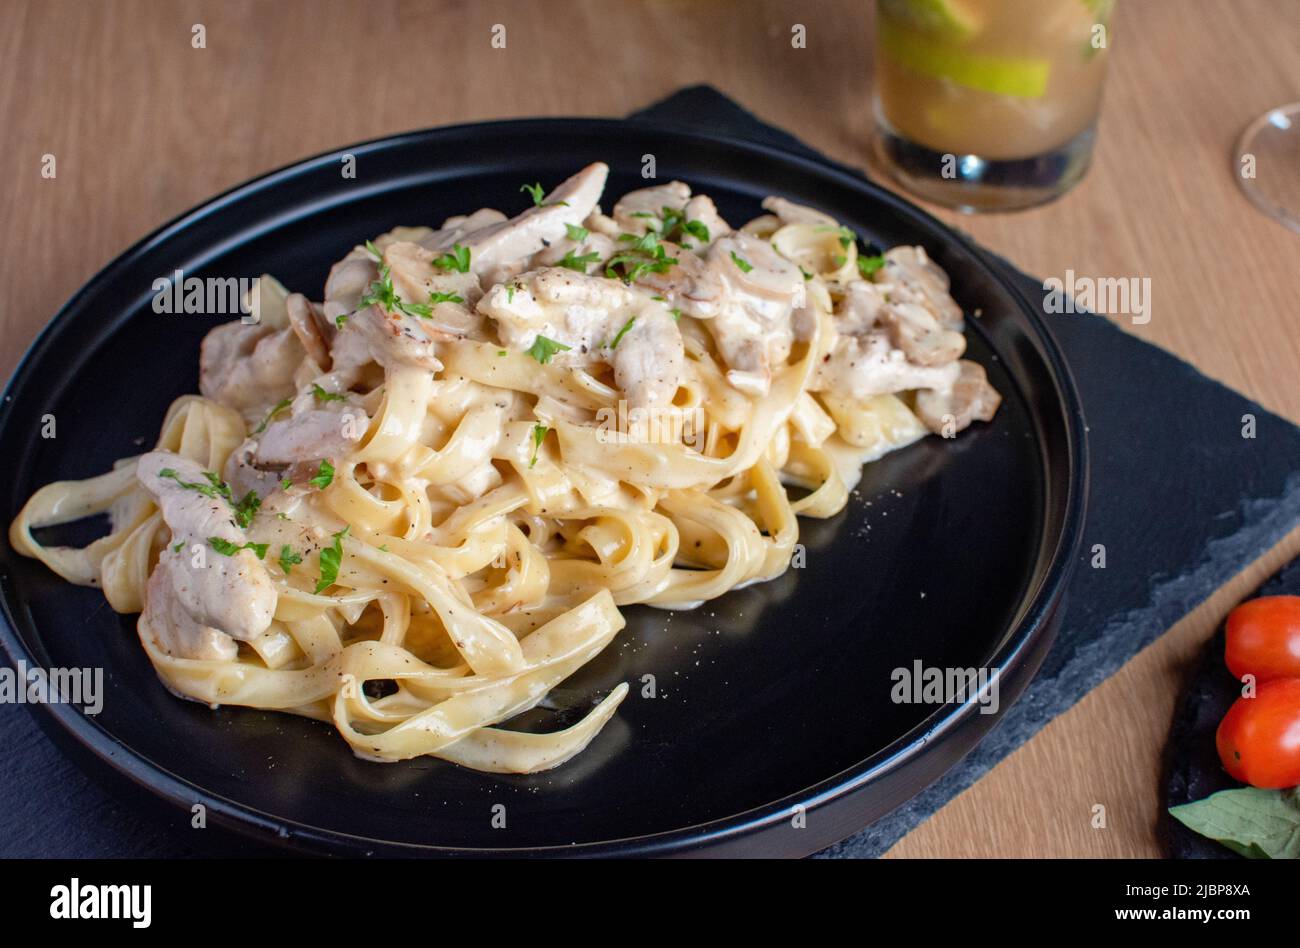 Alfredo chicken pasta with white sauce in a black plate Stock Photo - Alamy